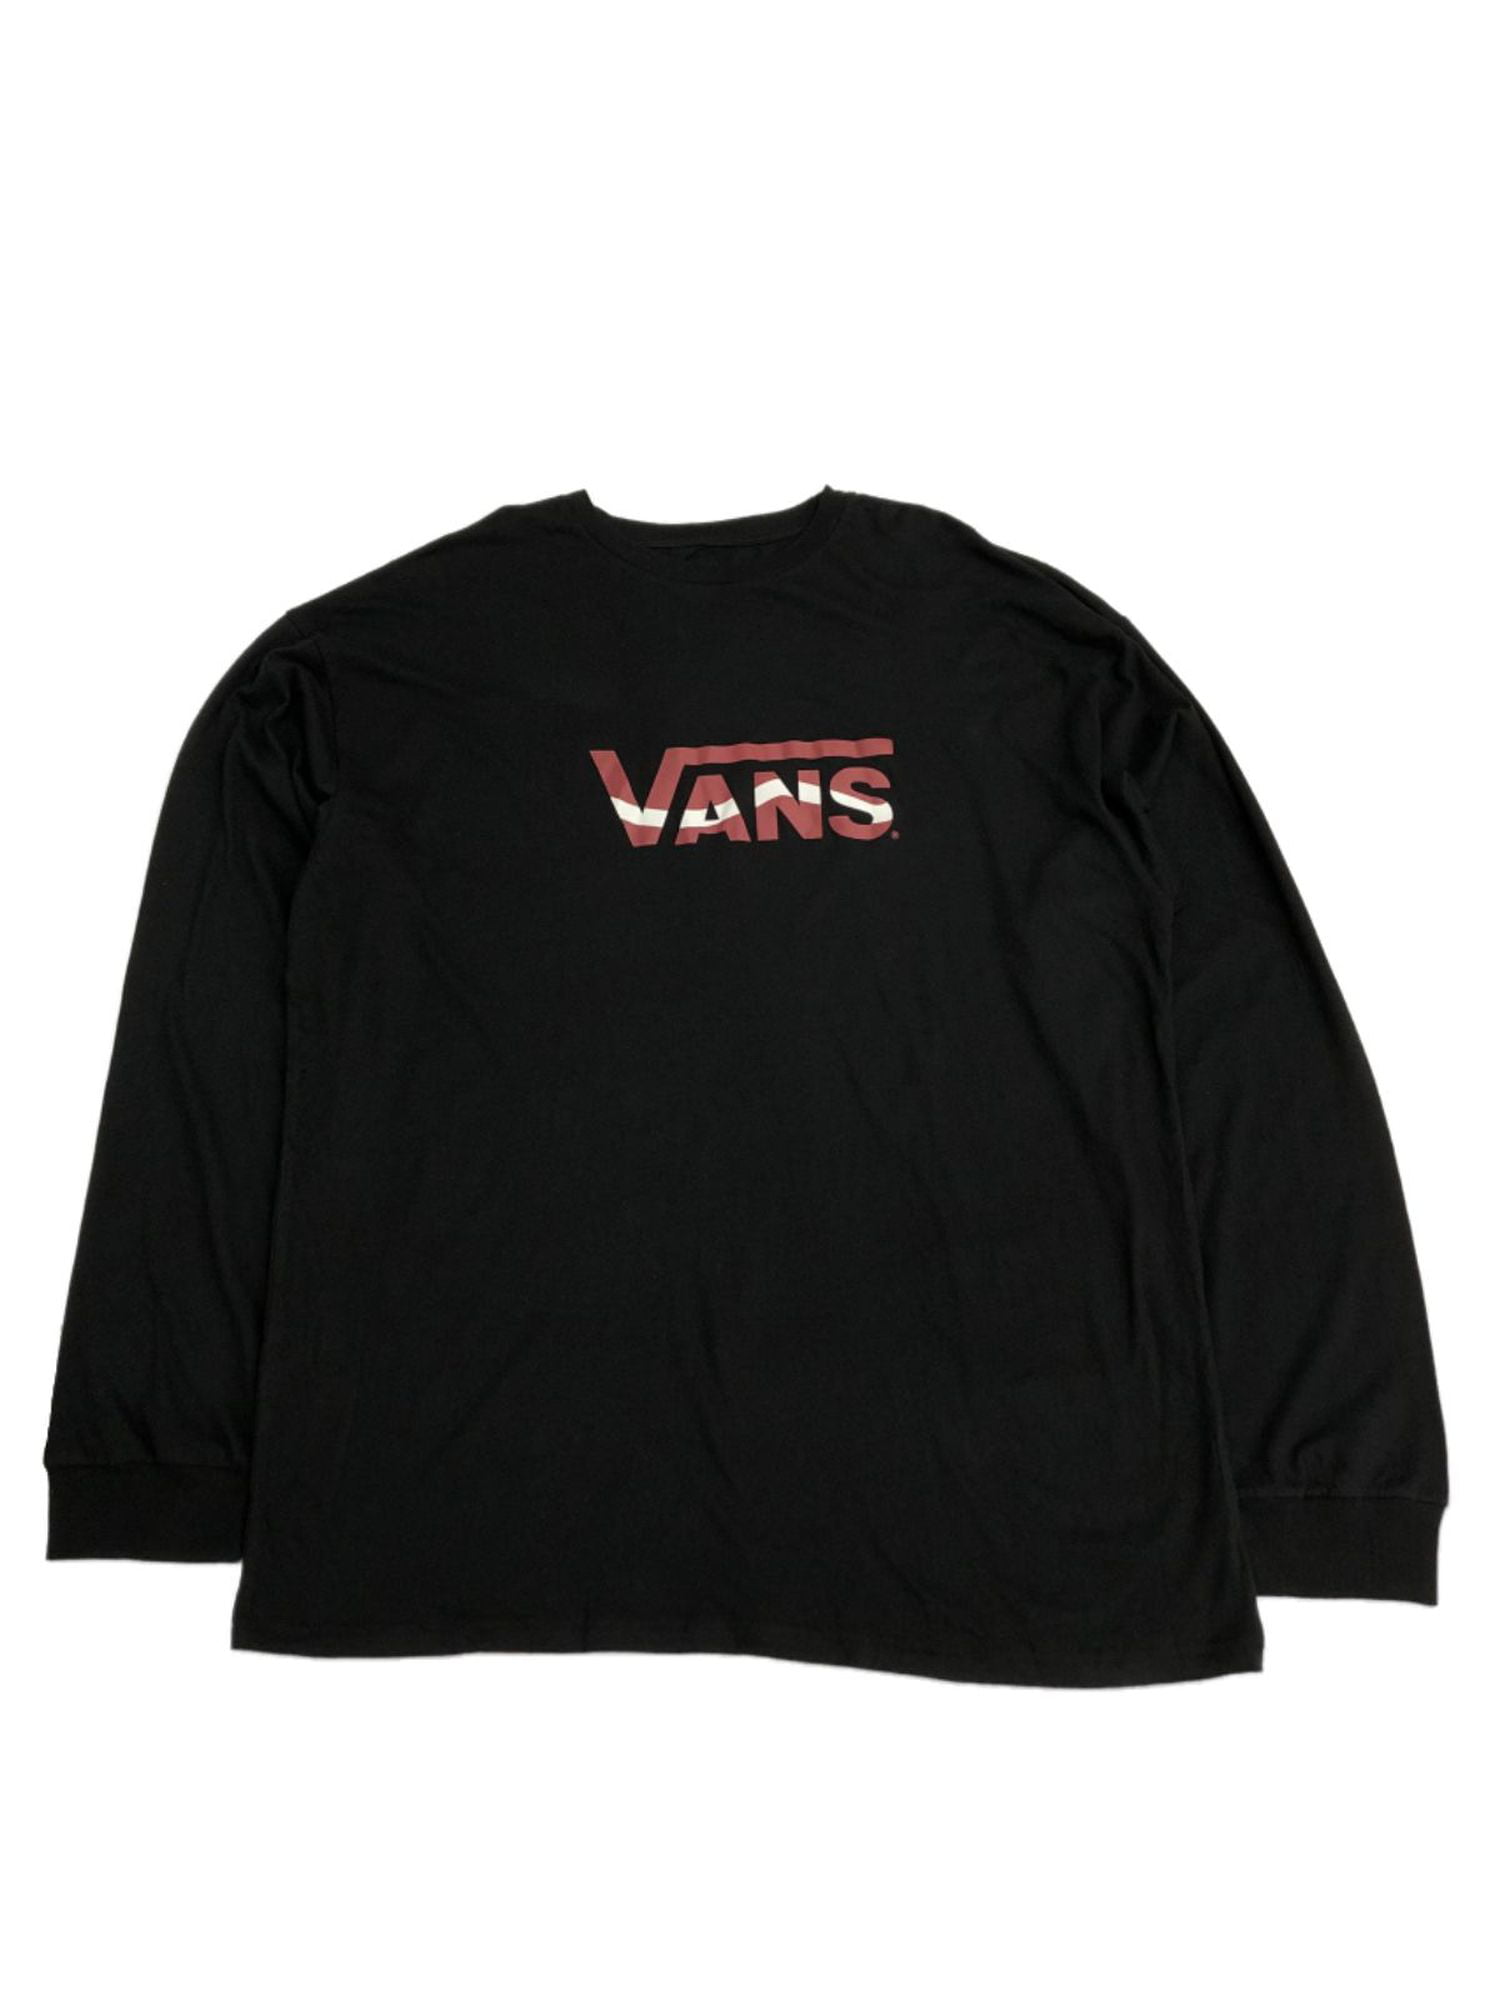 red and black vans shirt